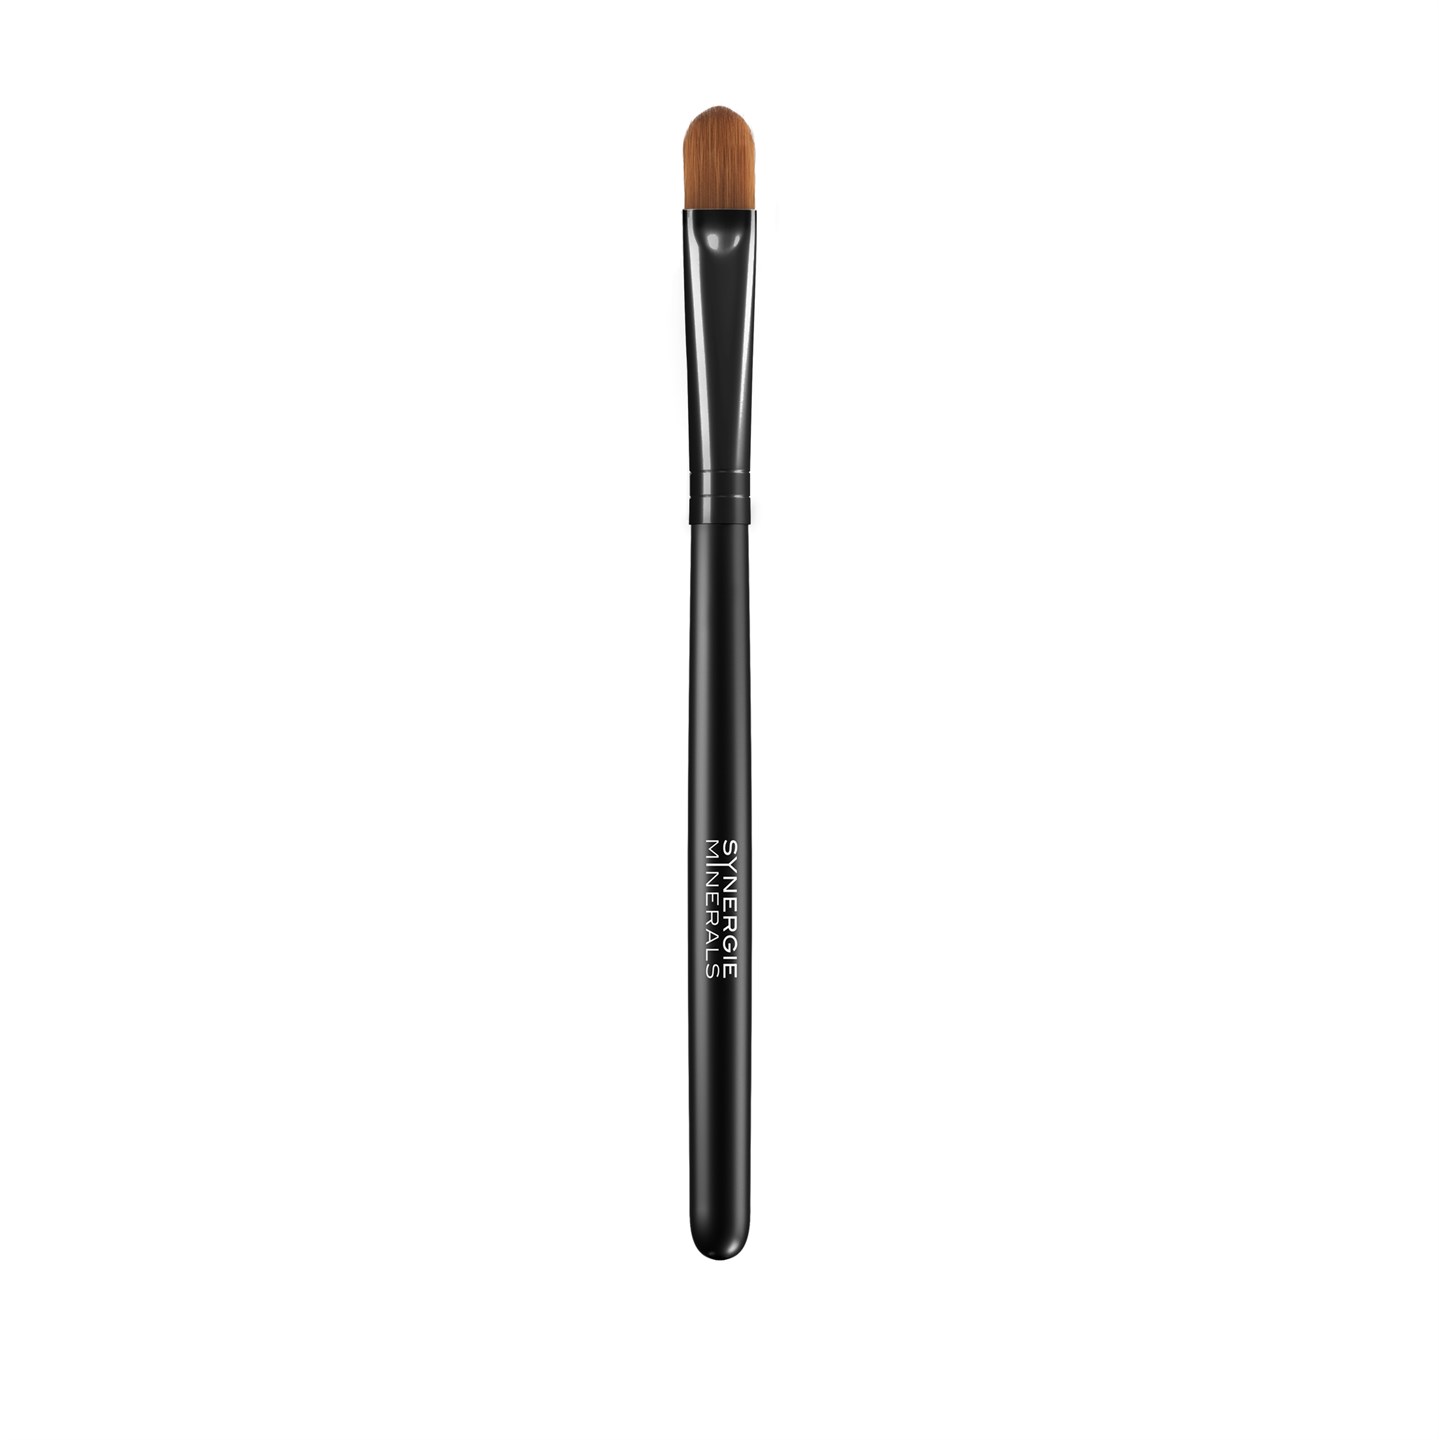 Synergie Minerals Small Concealer Brush